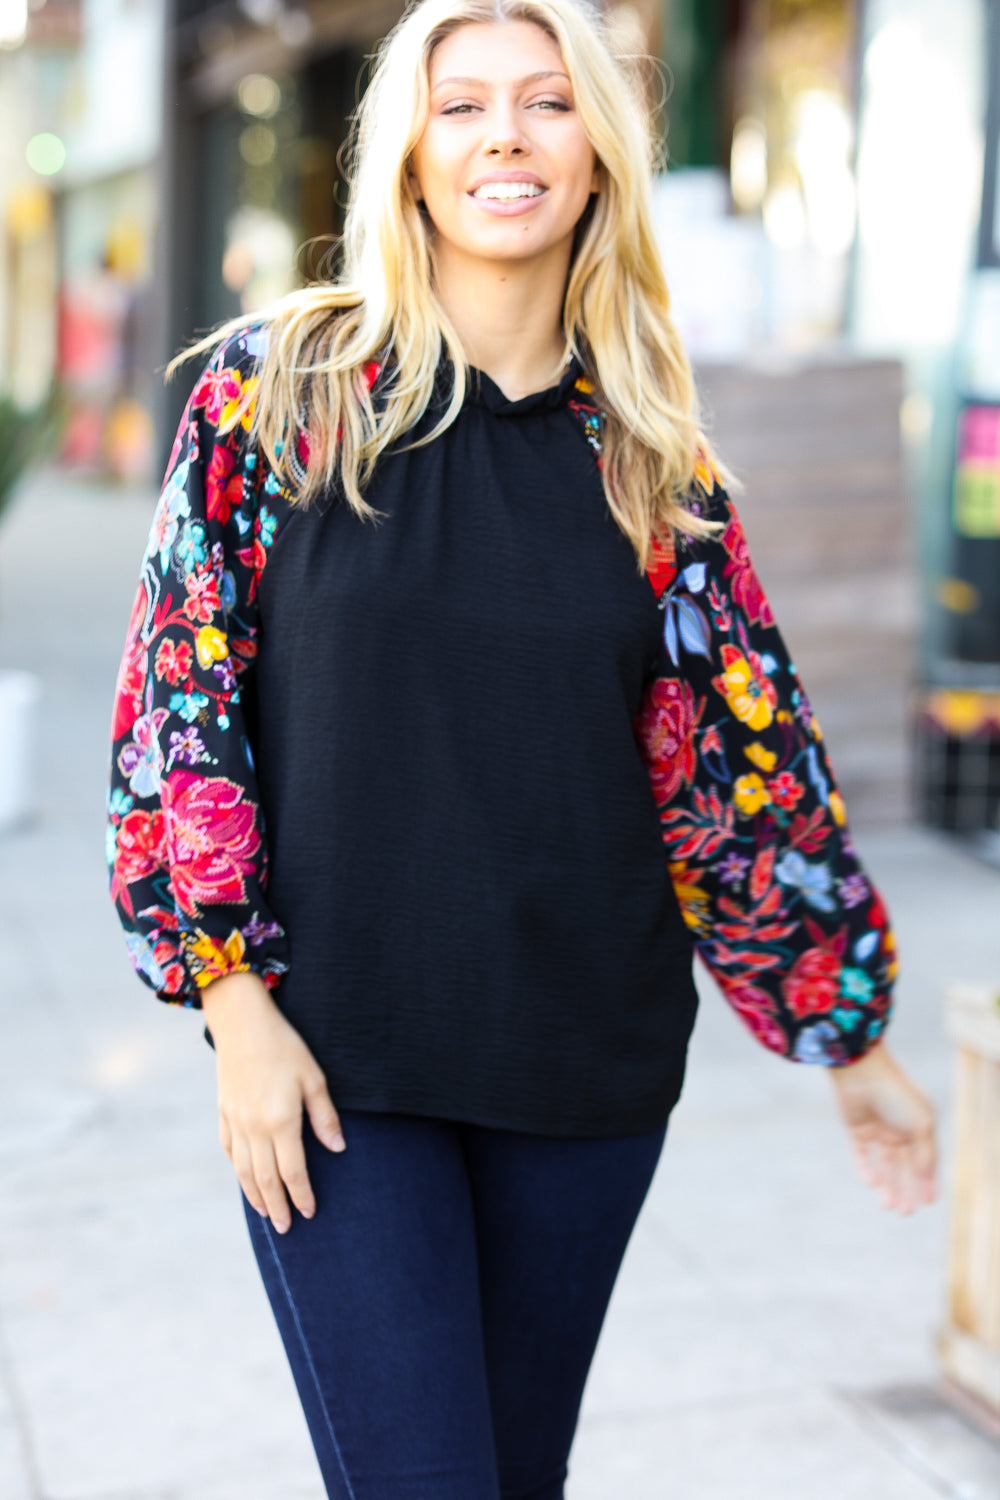 Be Yourself Black Sequin & Floral Embroidery Print Mock Neck Top Haptics